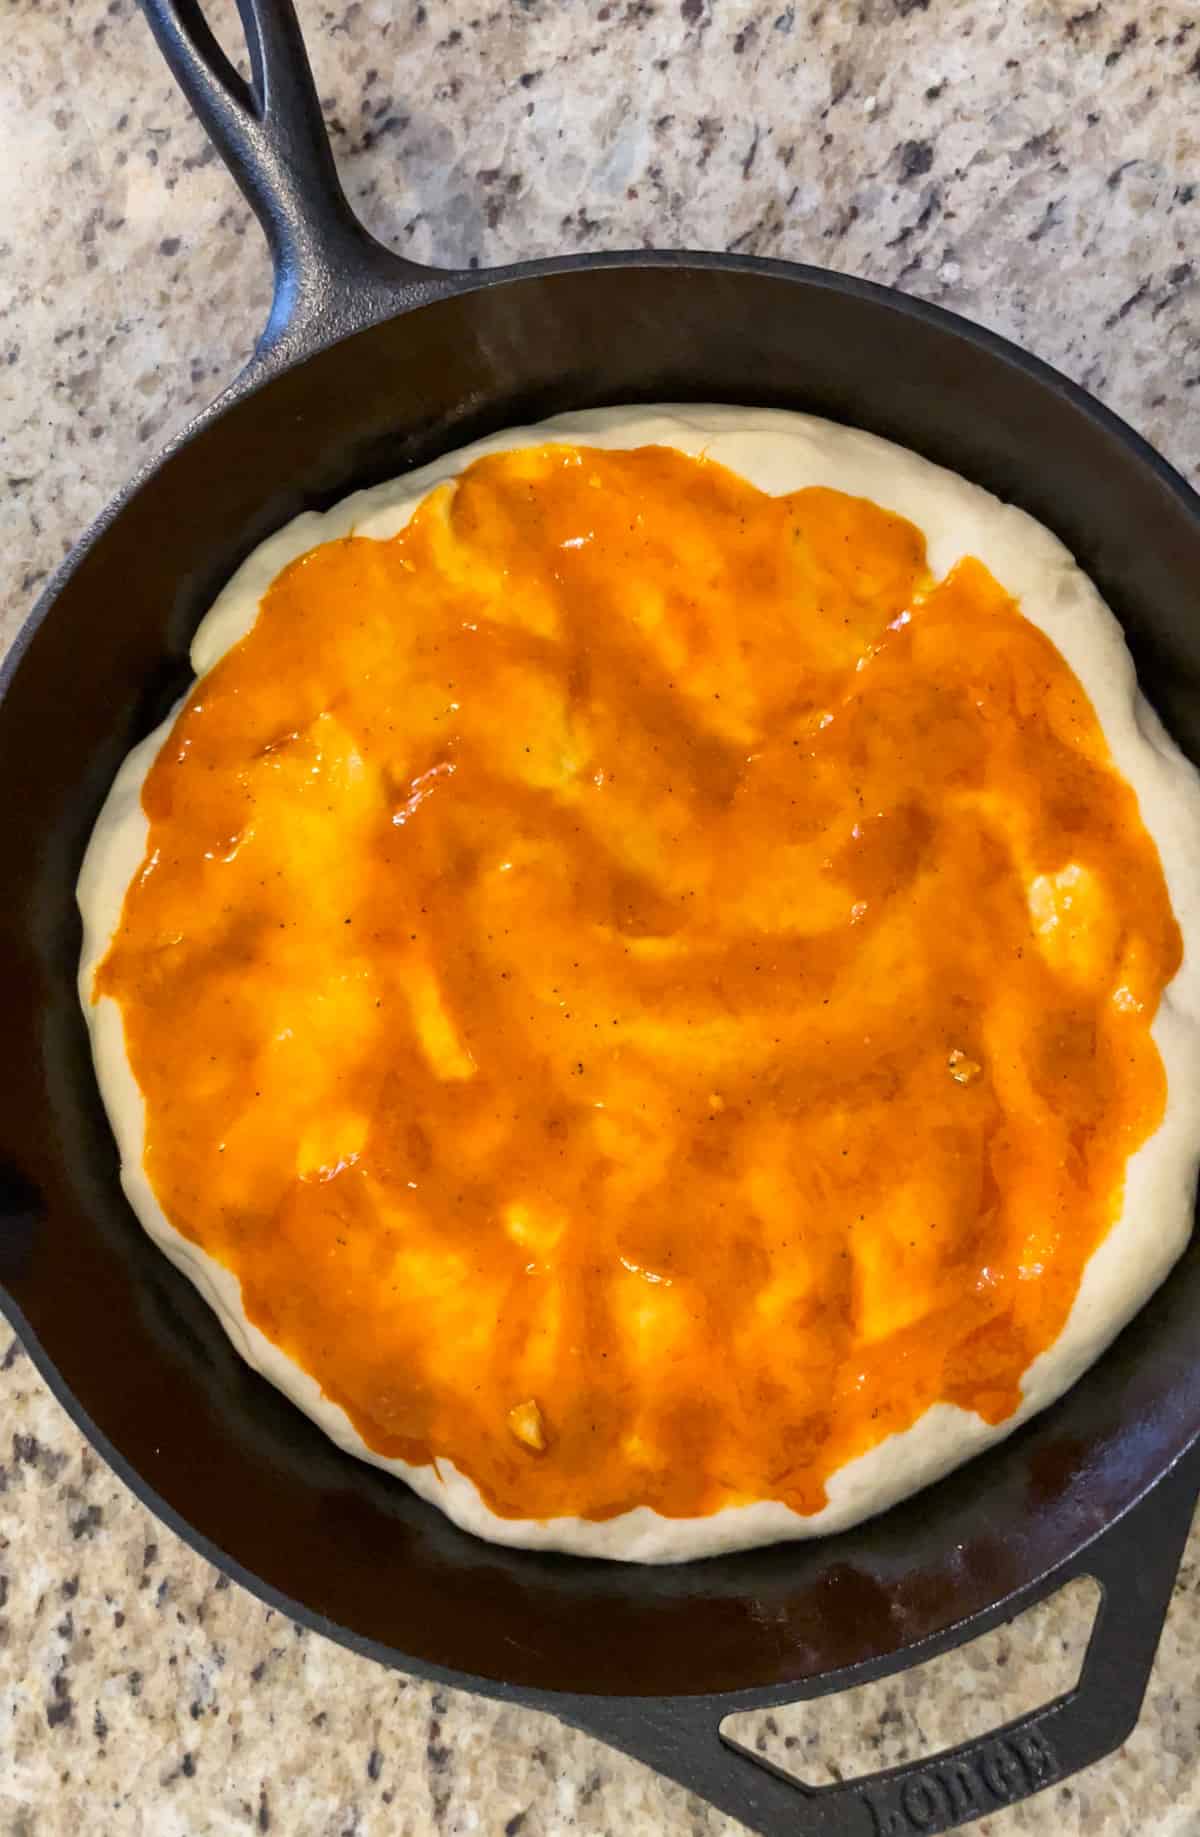 Buffalo sauce on a pizza crust in a cast iron pan.